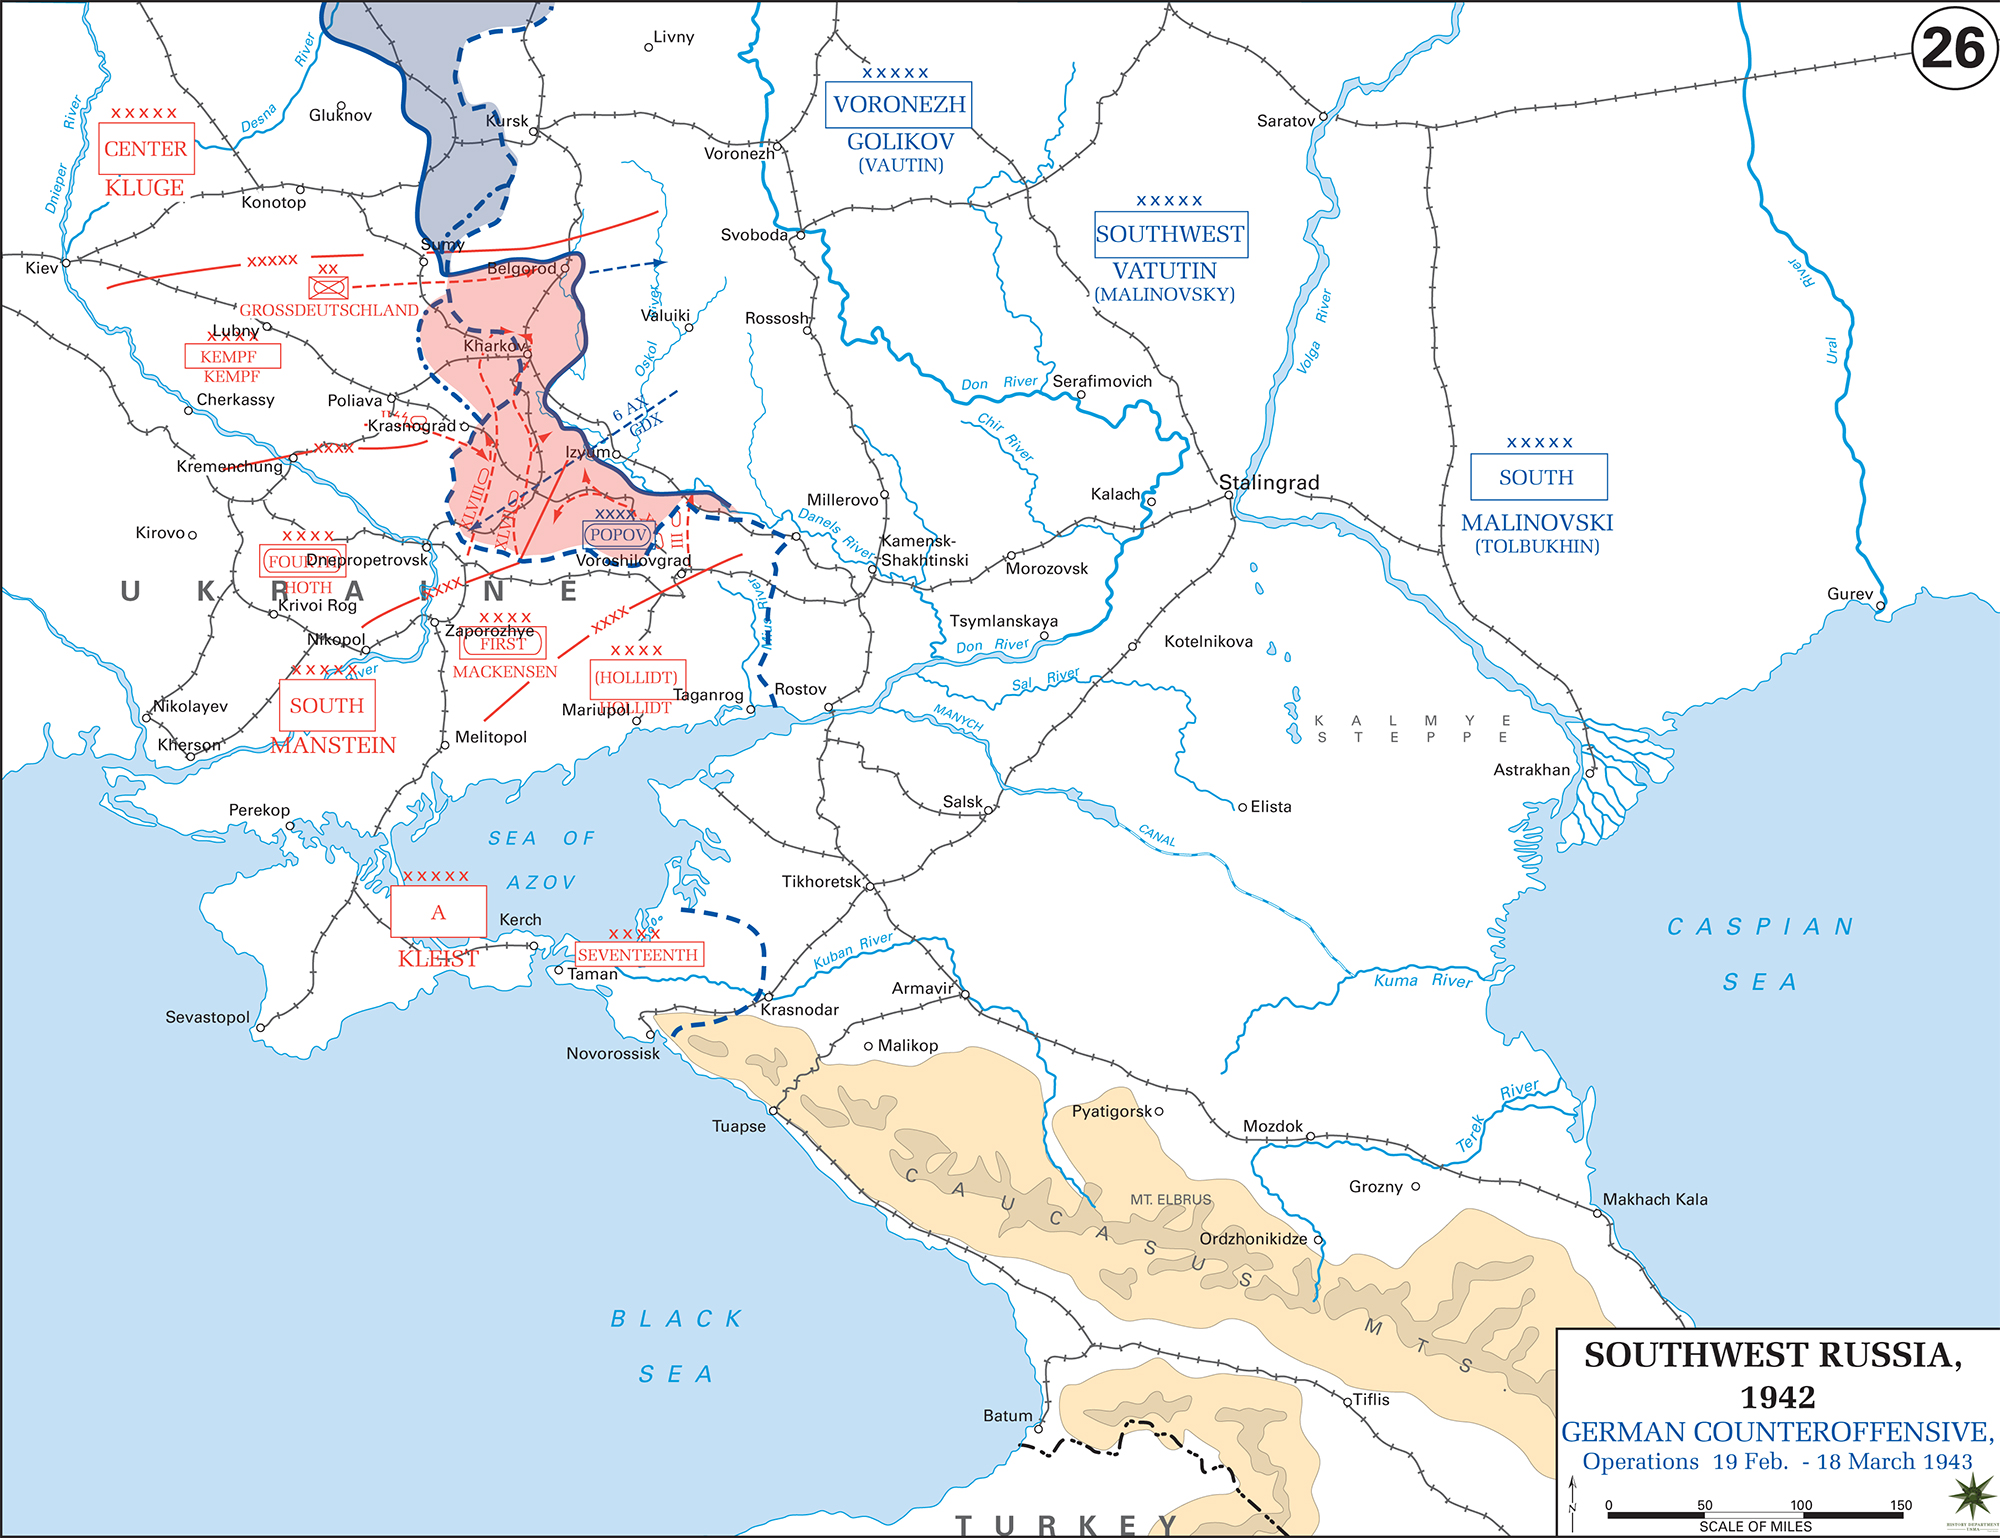 Map of WWII: Southwest Russia 1943, Soviet Winter Offensive, German Counter-Offensive, Operations February 19 - March 18, 1943